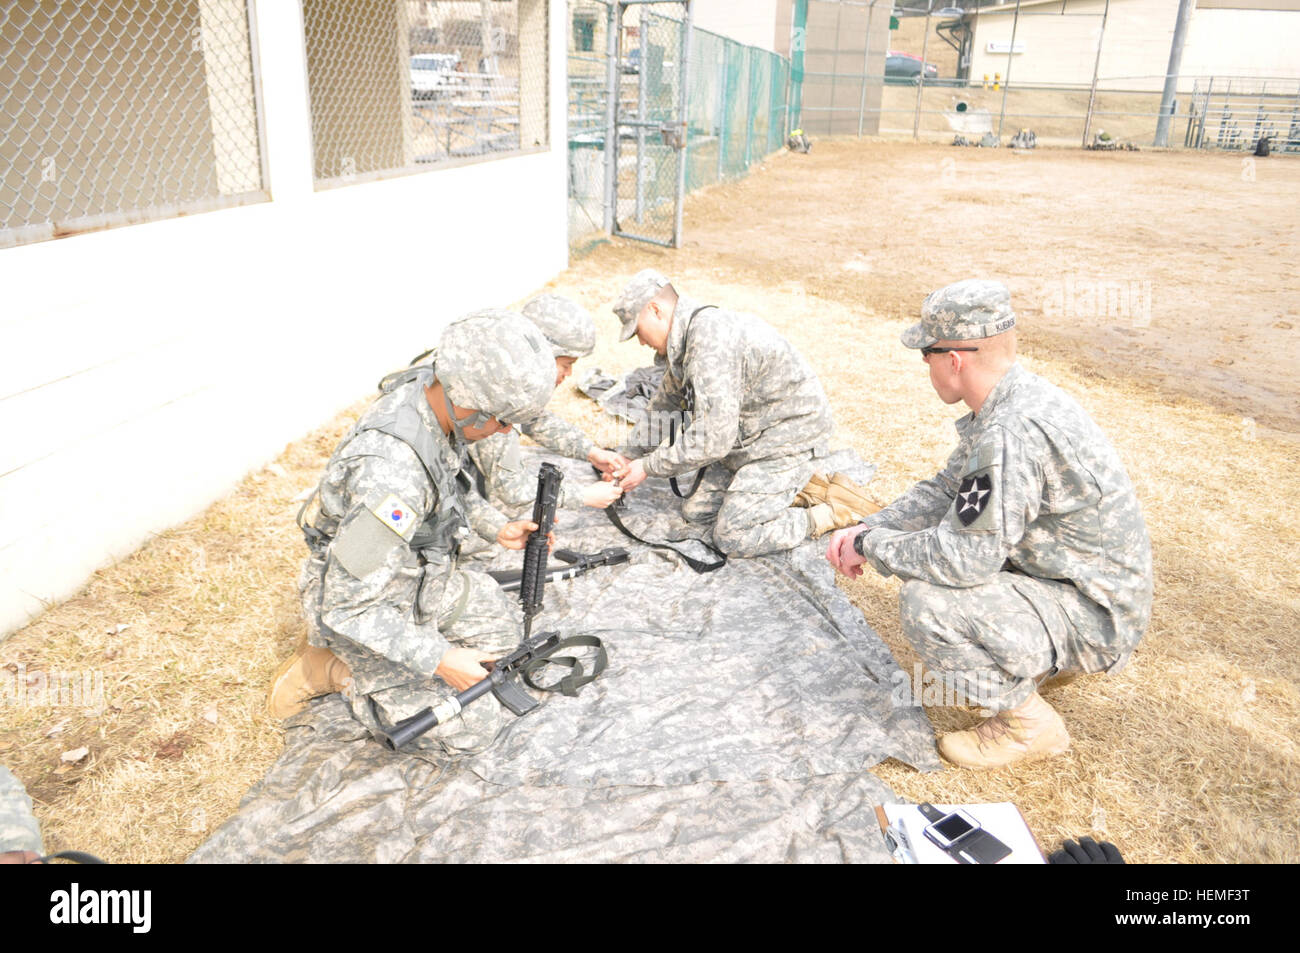 U.S. Soldiers with the 210th Fires Brigade disassemble and reassemble M16A2 rifles during medical training at Carey Field in Camp Casey, Dongducheon, Gyeonggi province, South Korea, Feb. 28. (U.S. Army photo by Pfc. Kim Han-byeol/Released) 210th Fires Brigade conducts EFMB train-up 130228-A-WG463-044 Stock Photo